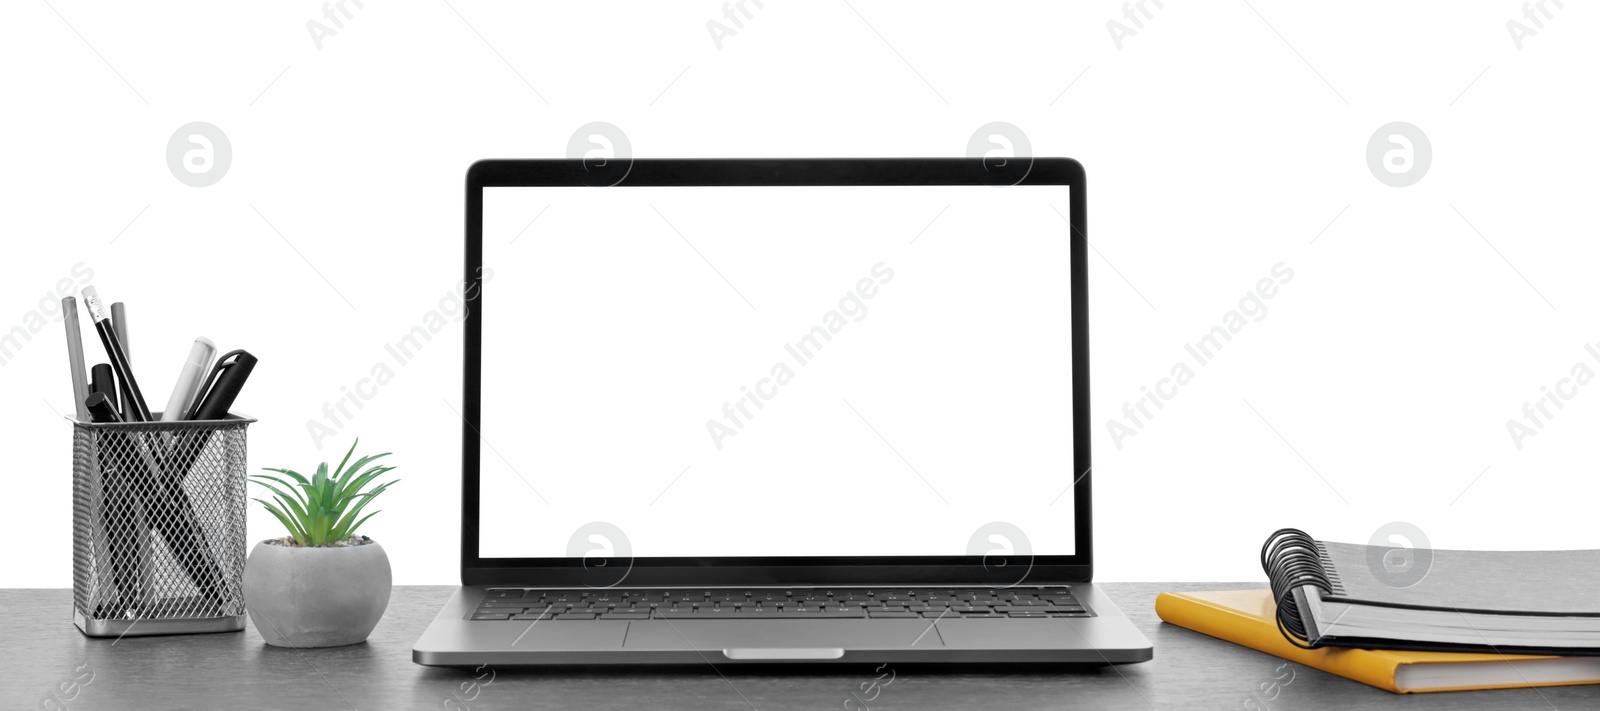 Photo of Computer, potted plant and stationery on table against white background. Stylish workplace